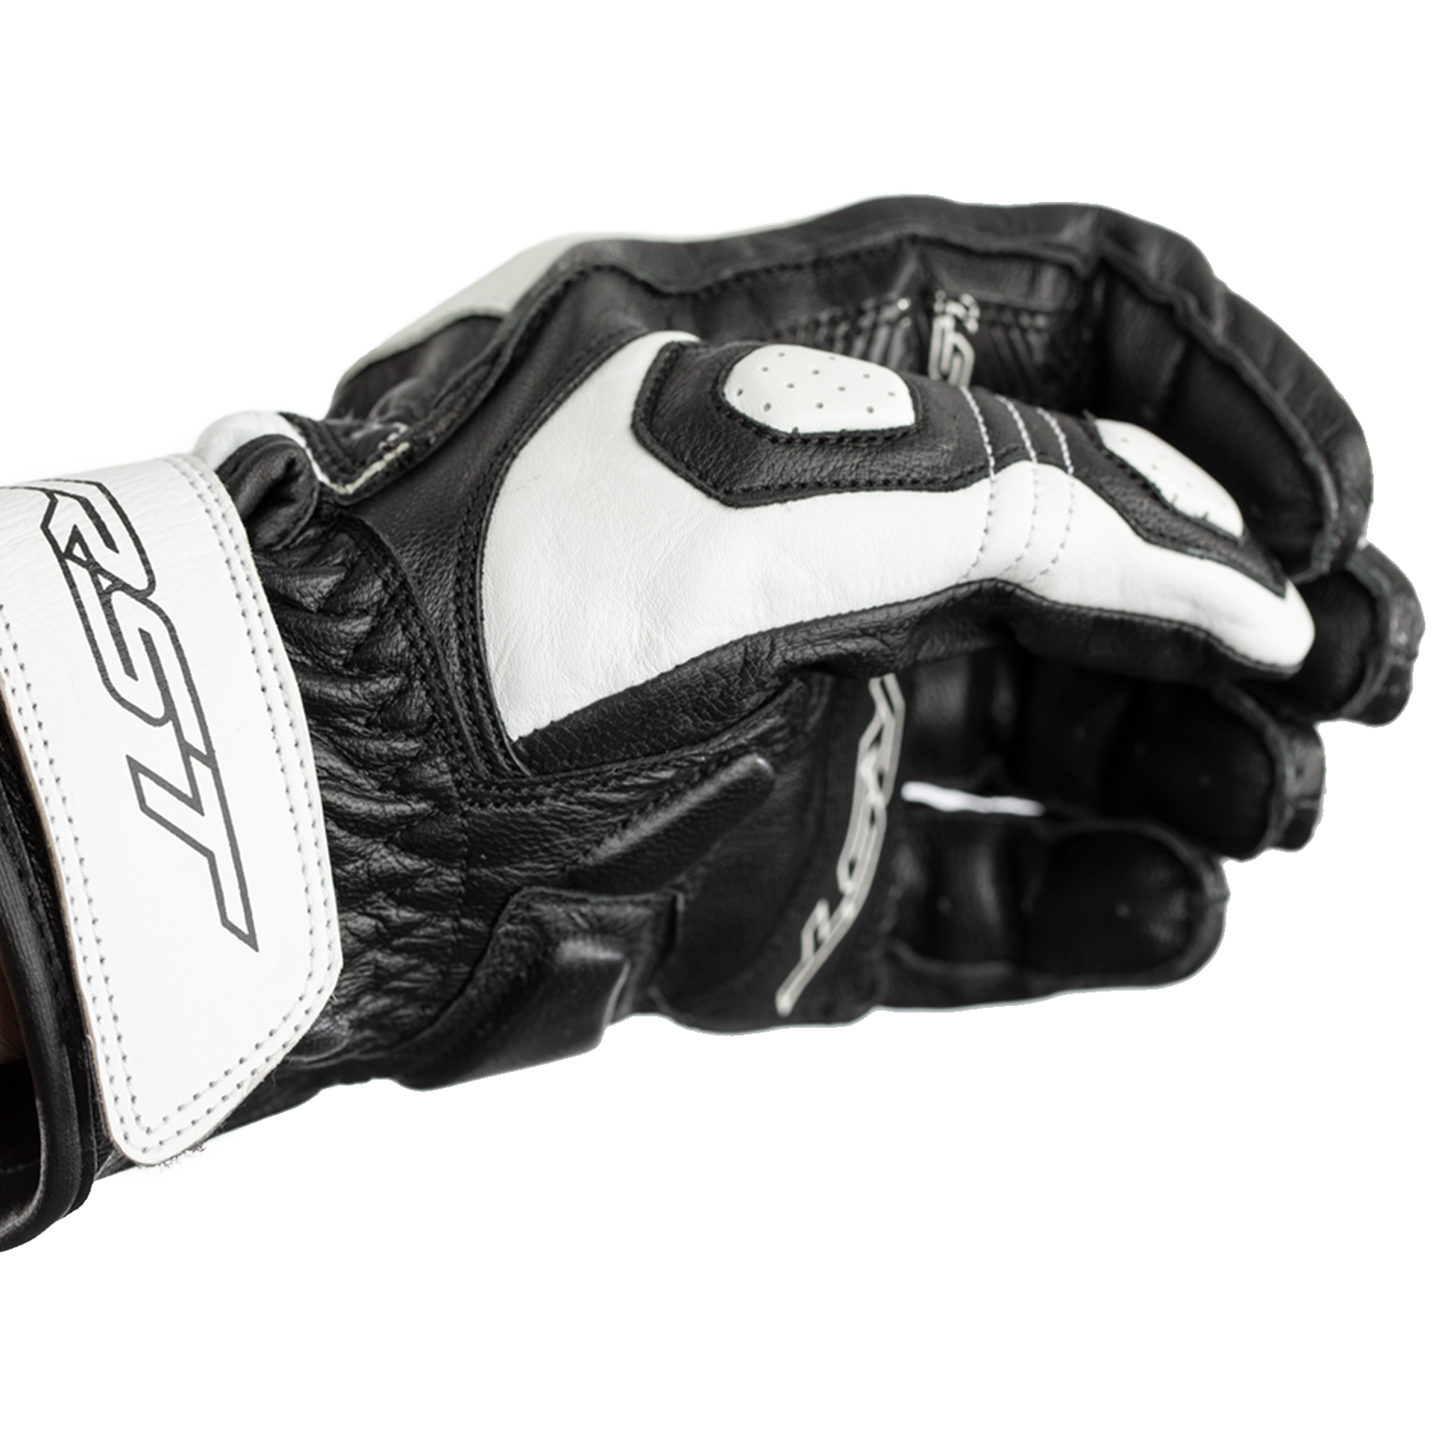 RST Stunt 3 III Ladies Leather Riding Gloves - CE Approved - White